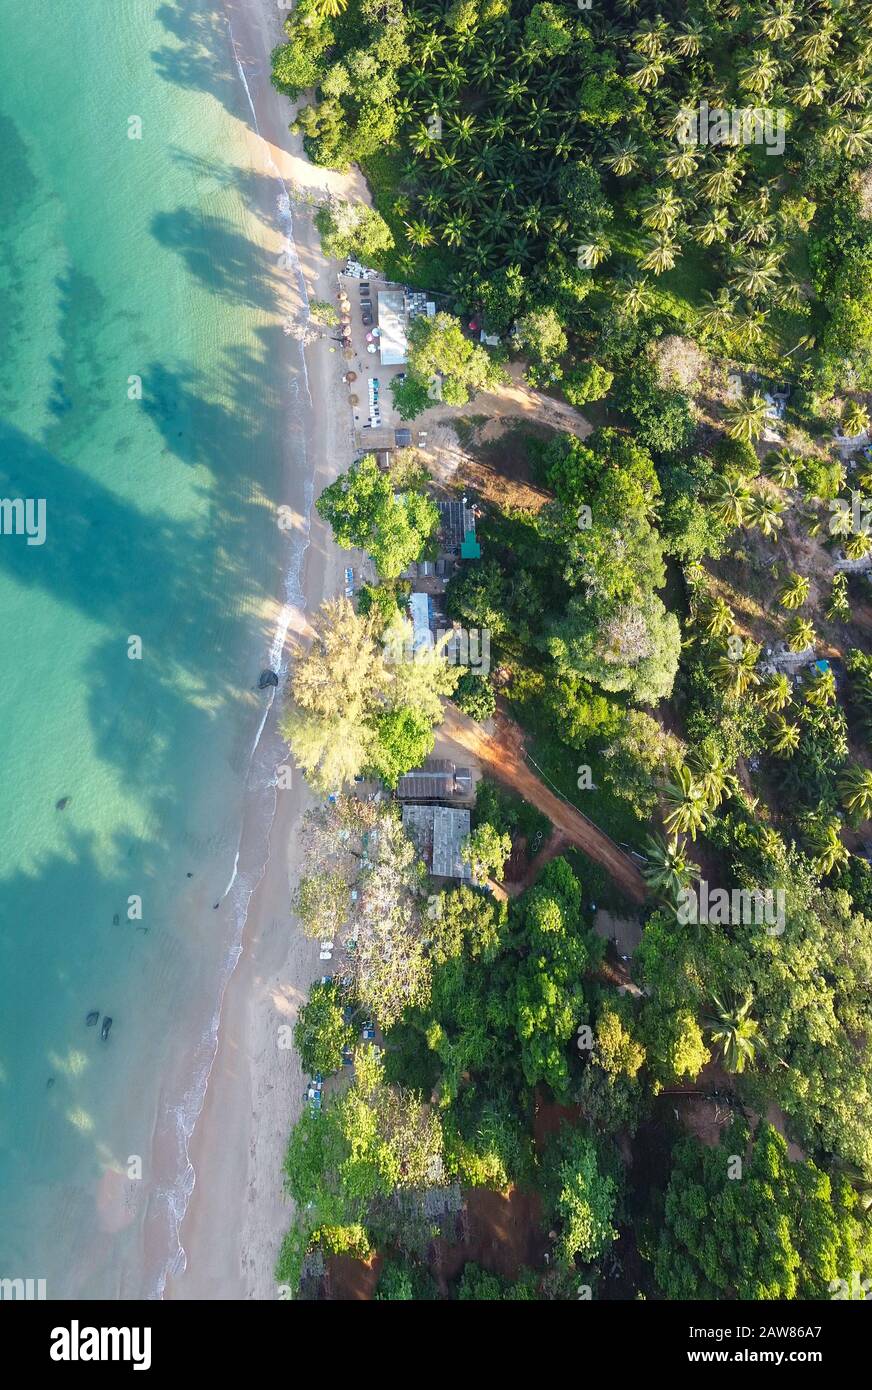 Amazing aerial view of tropical beach from drone. Stock Photo